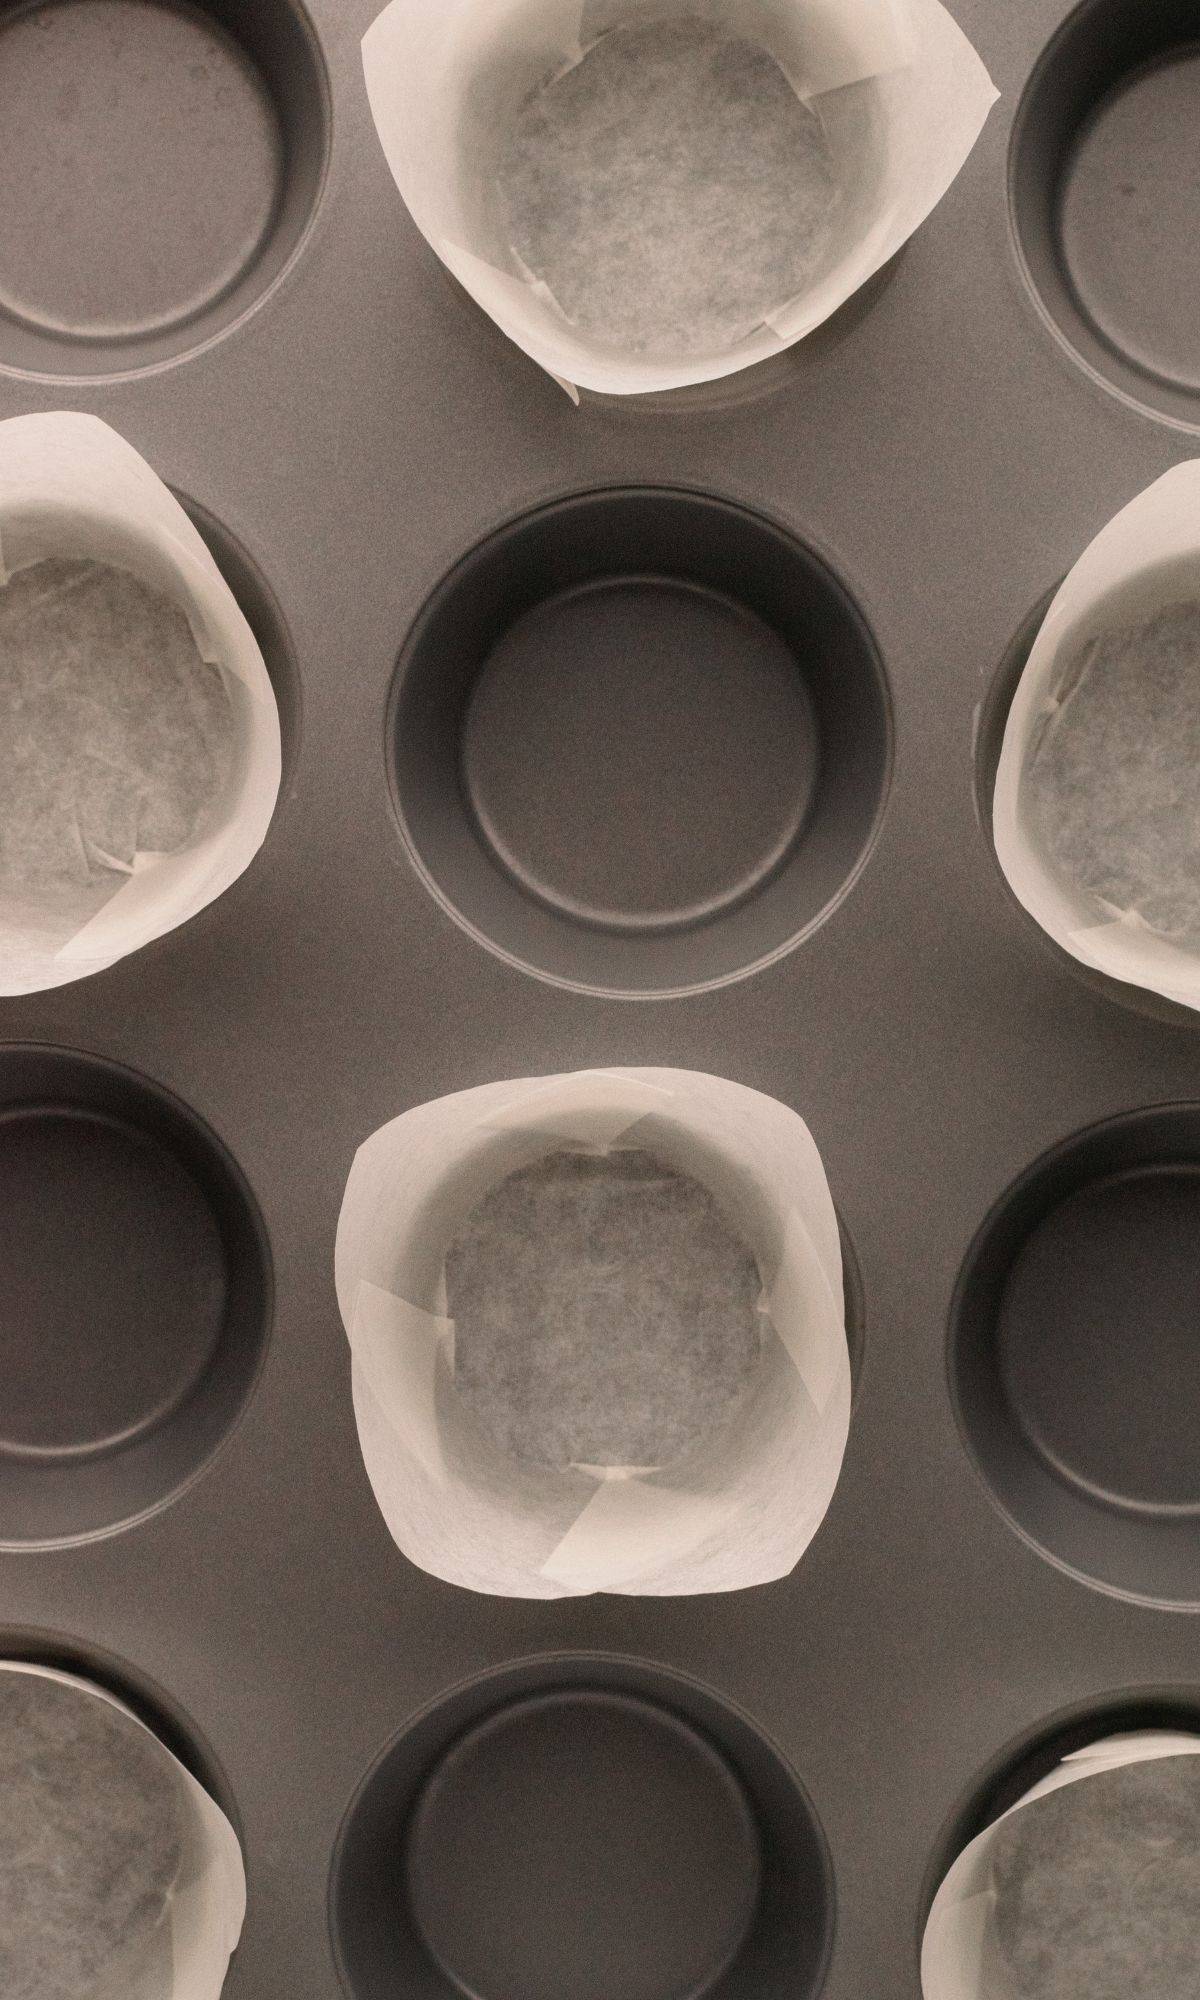 A muffin tin with muffin liners in everyother hole.